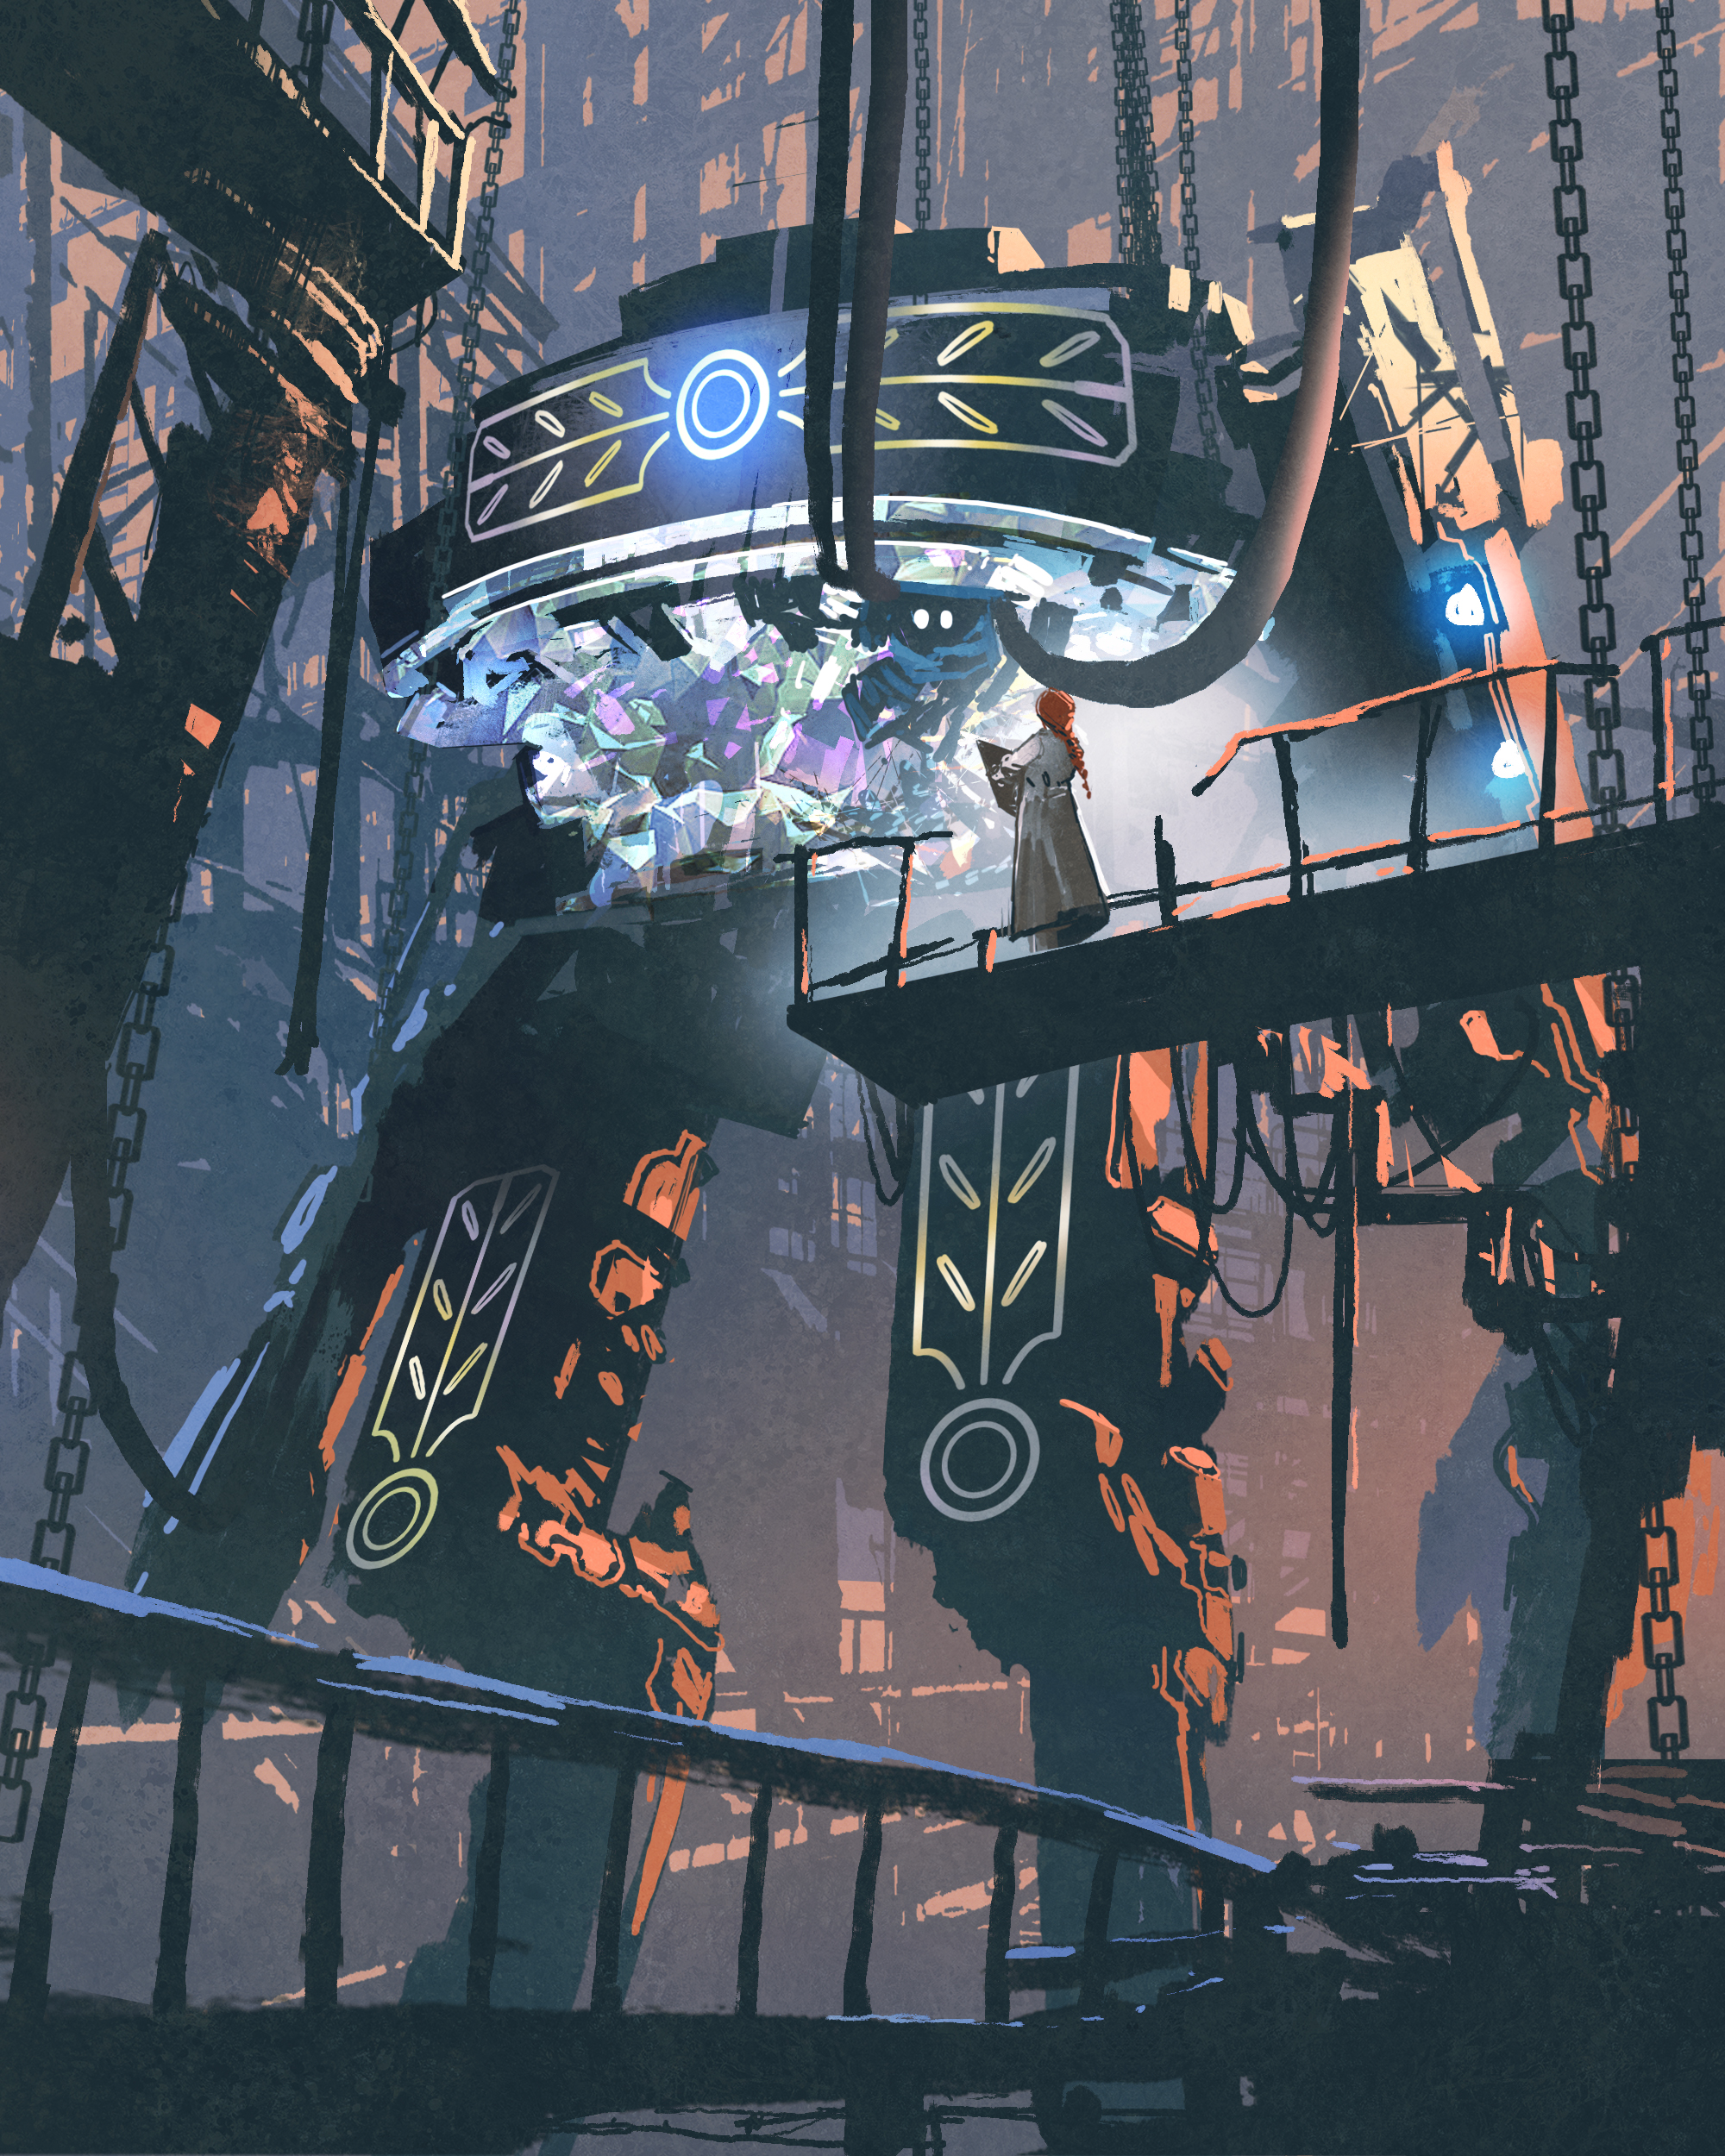 A giant mech, made of stained glass and metal.